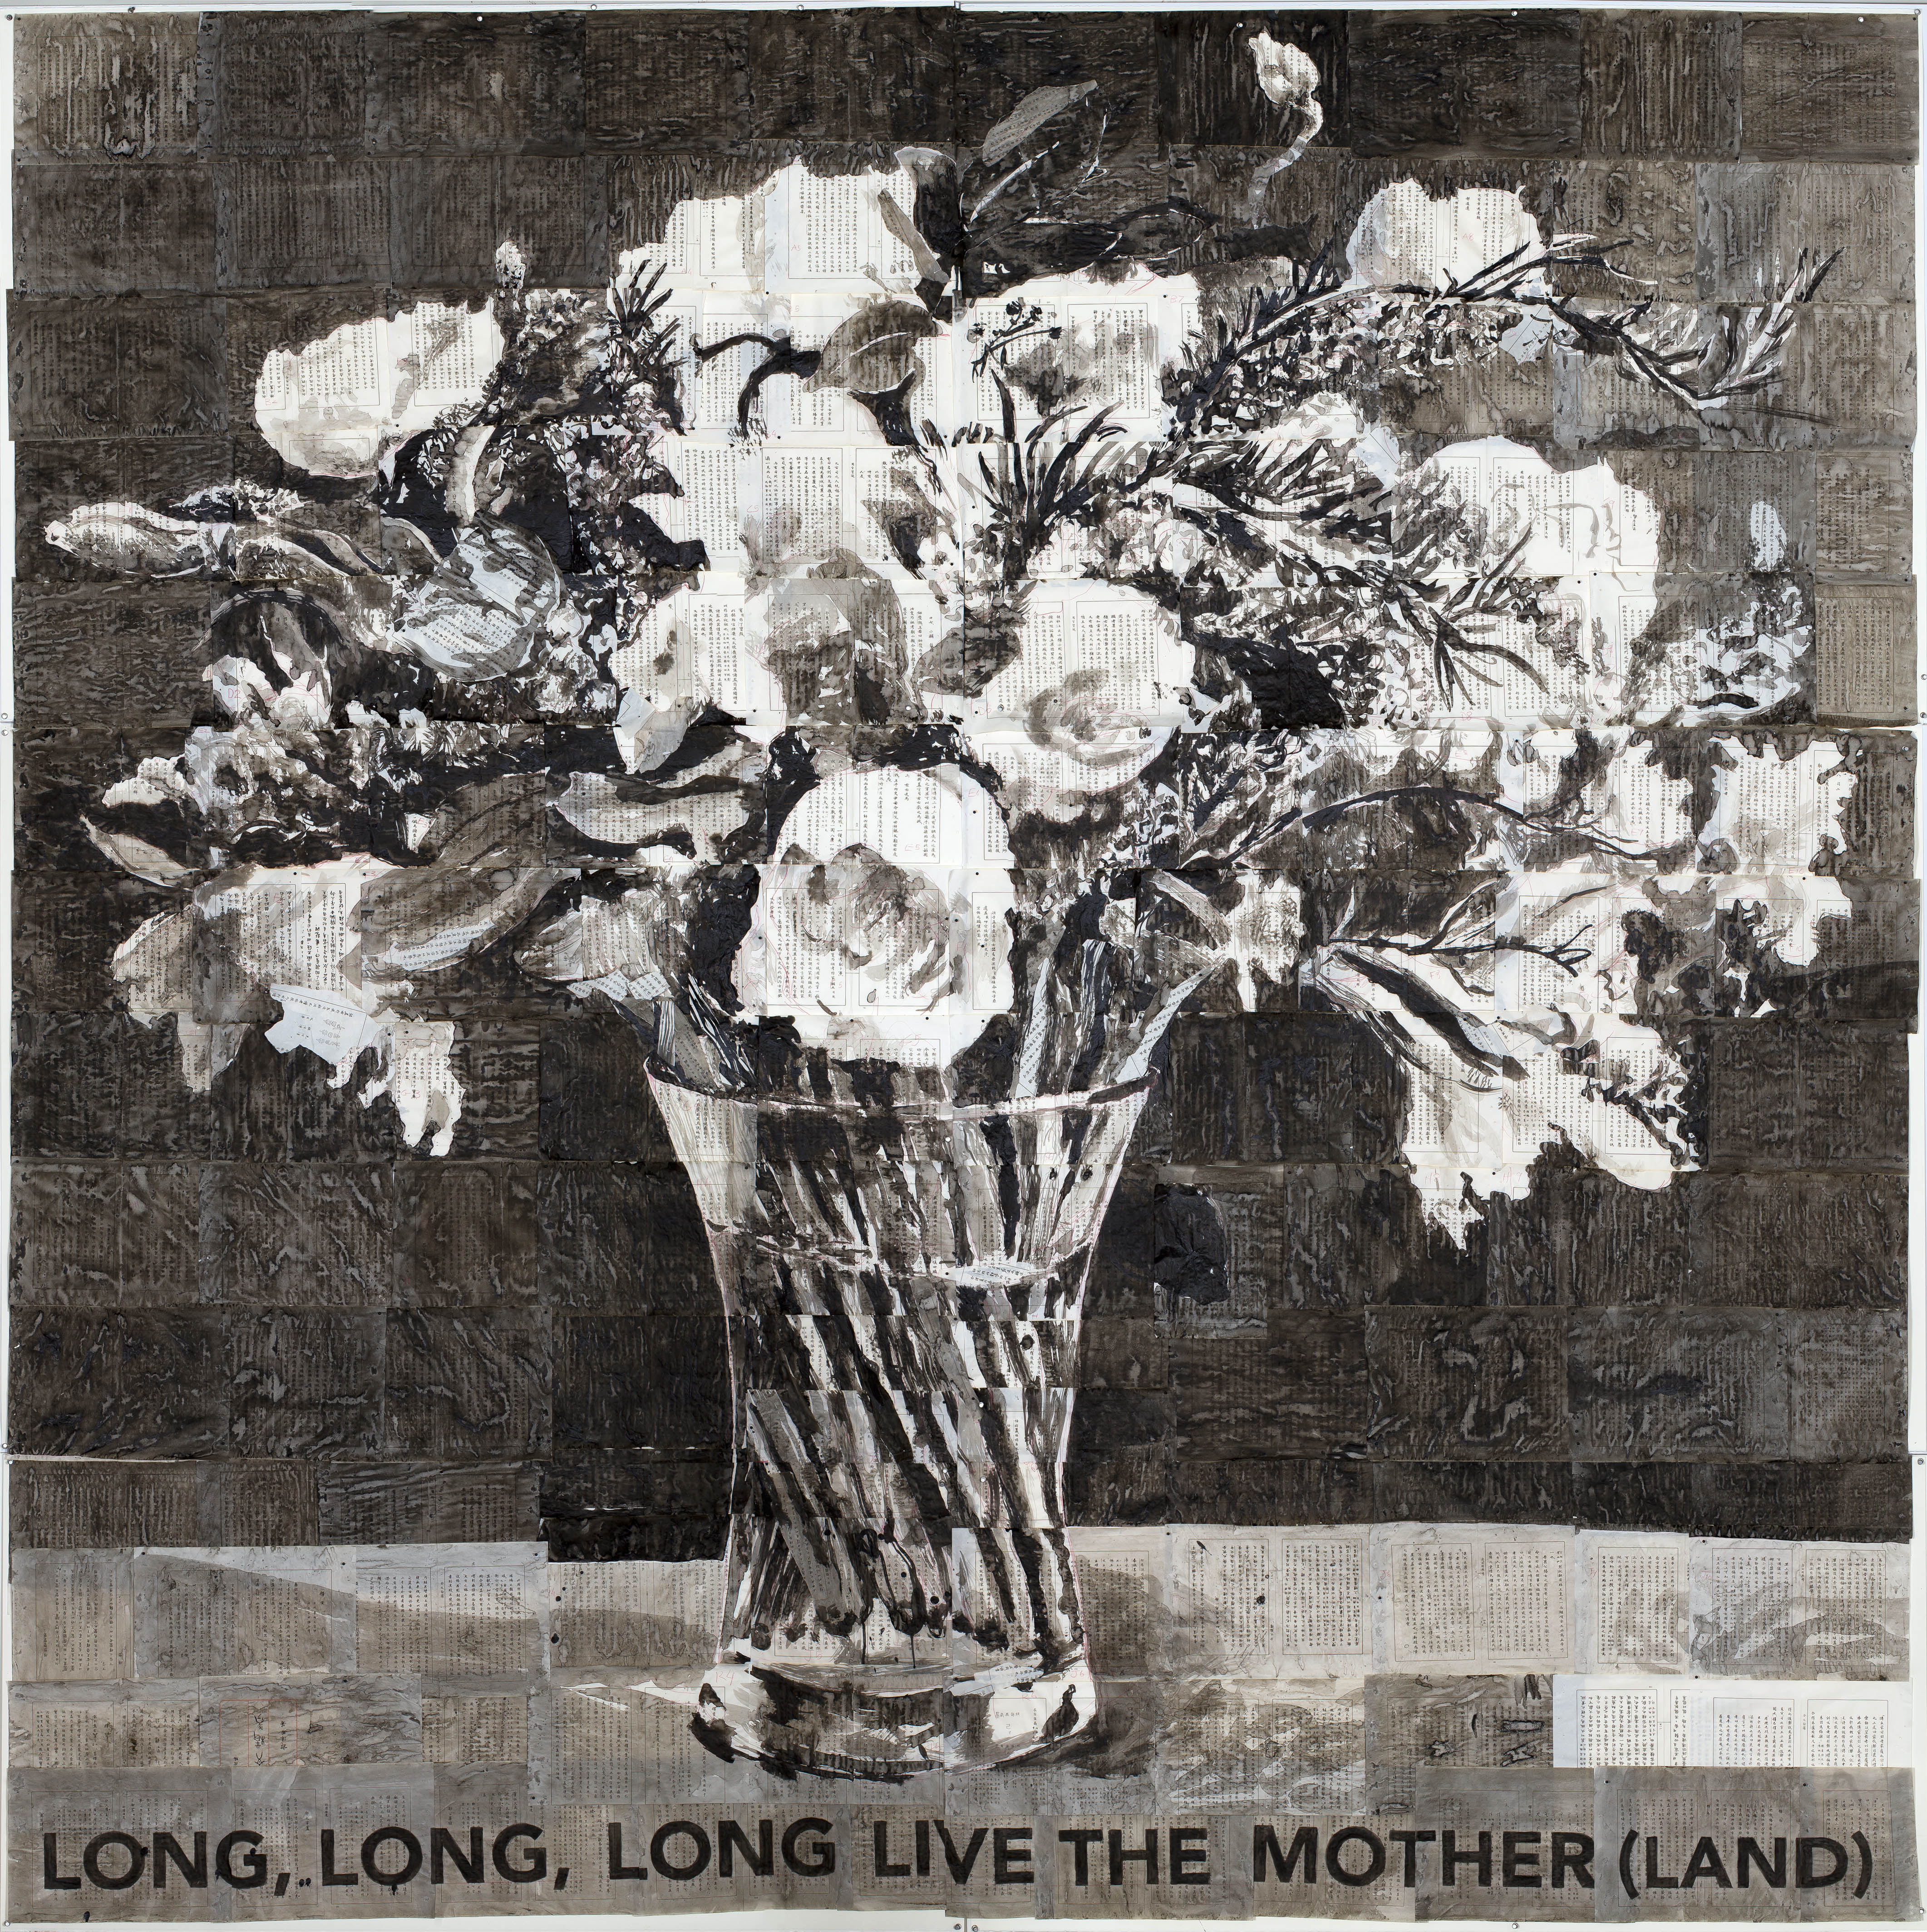 Untitled (Long, Long, Long Live the Motherland)